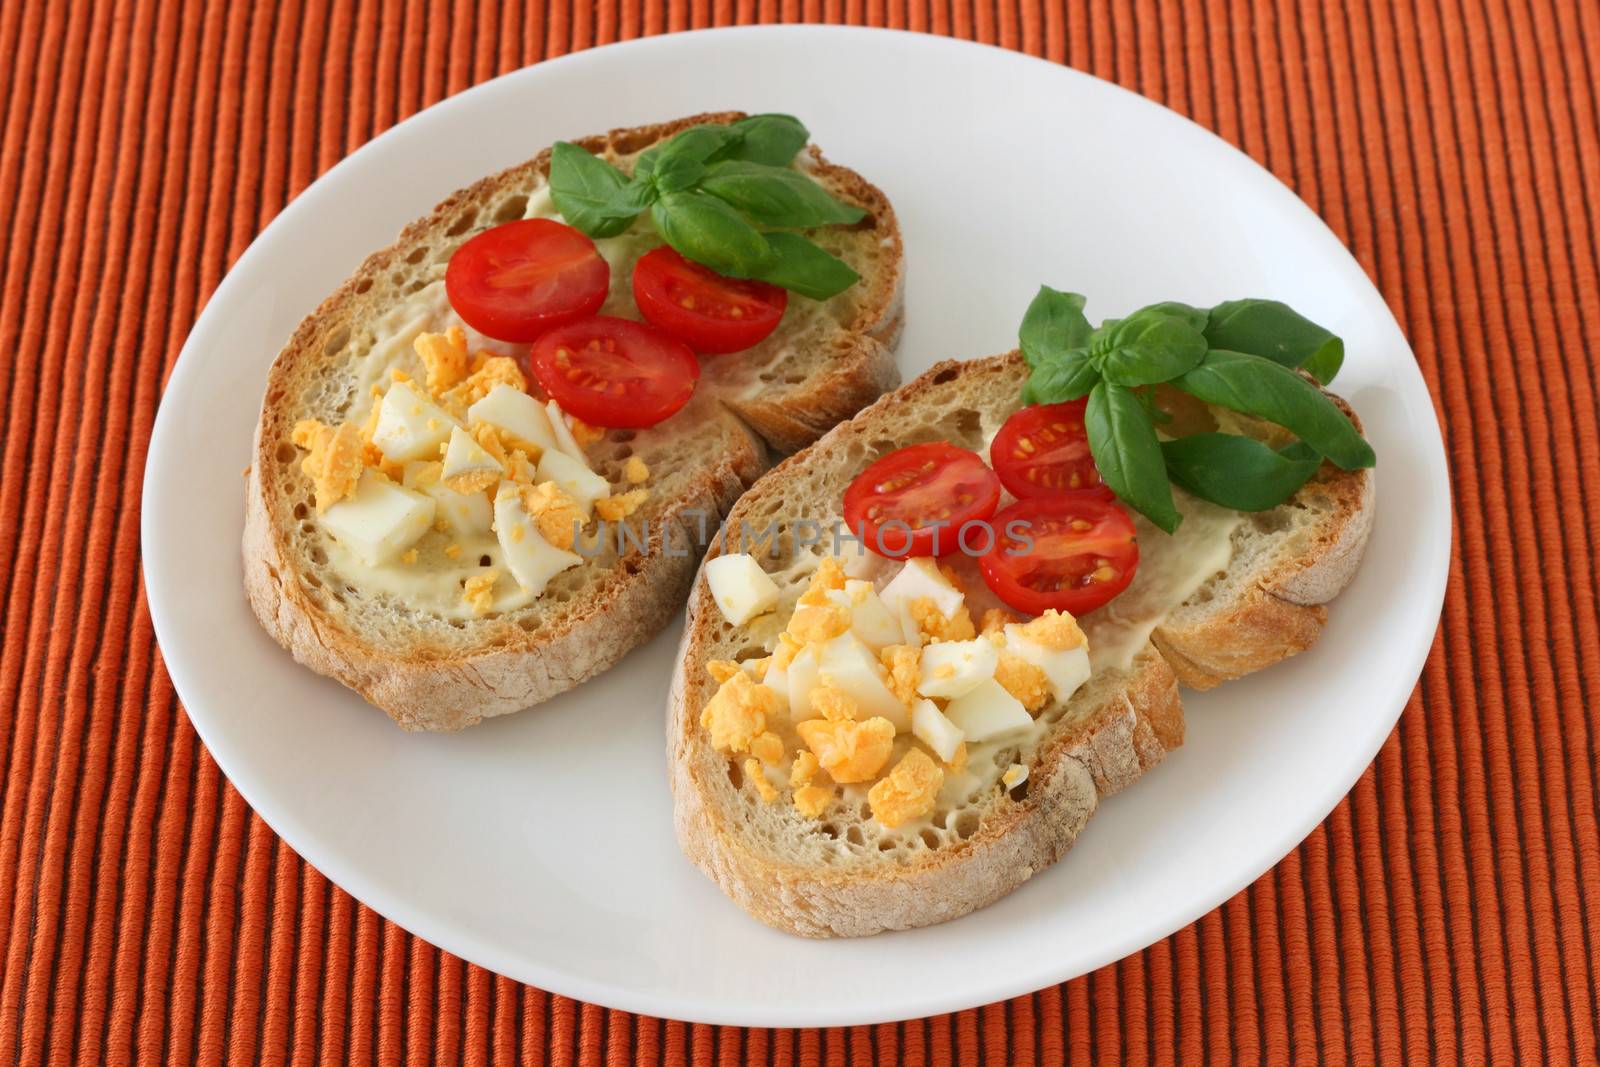 bread with cut egg